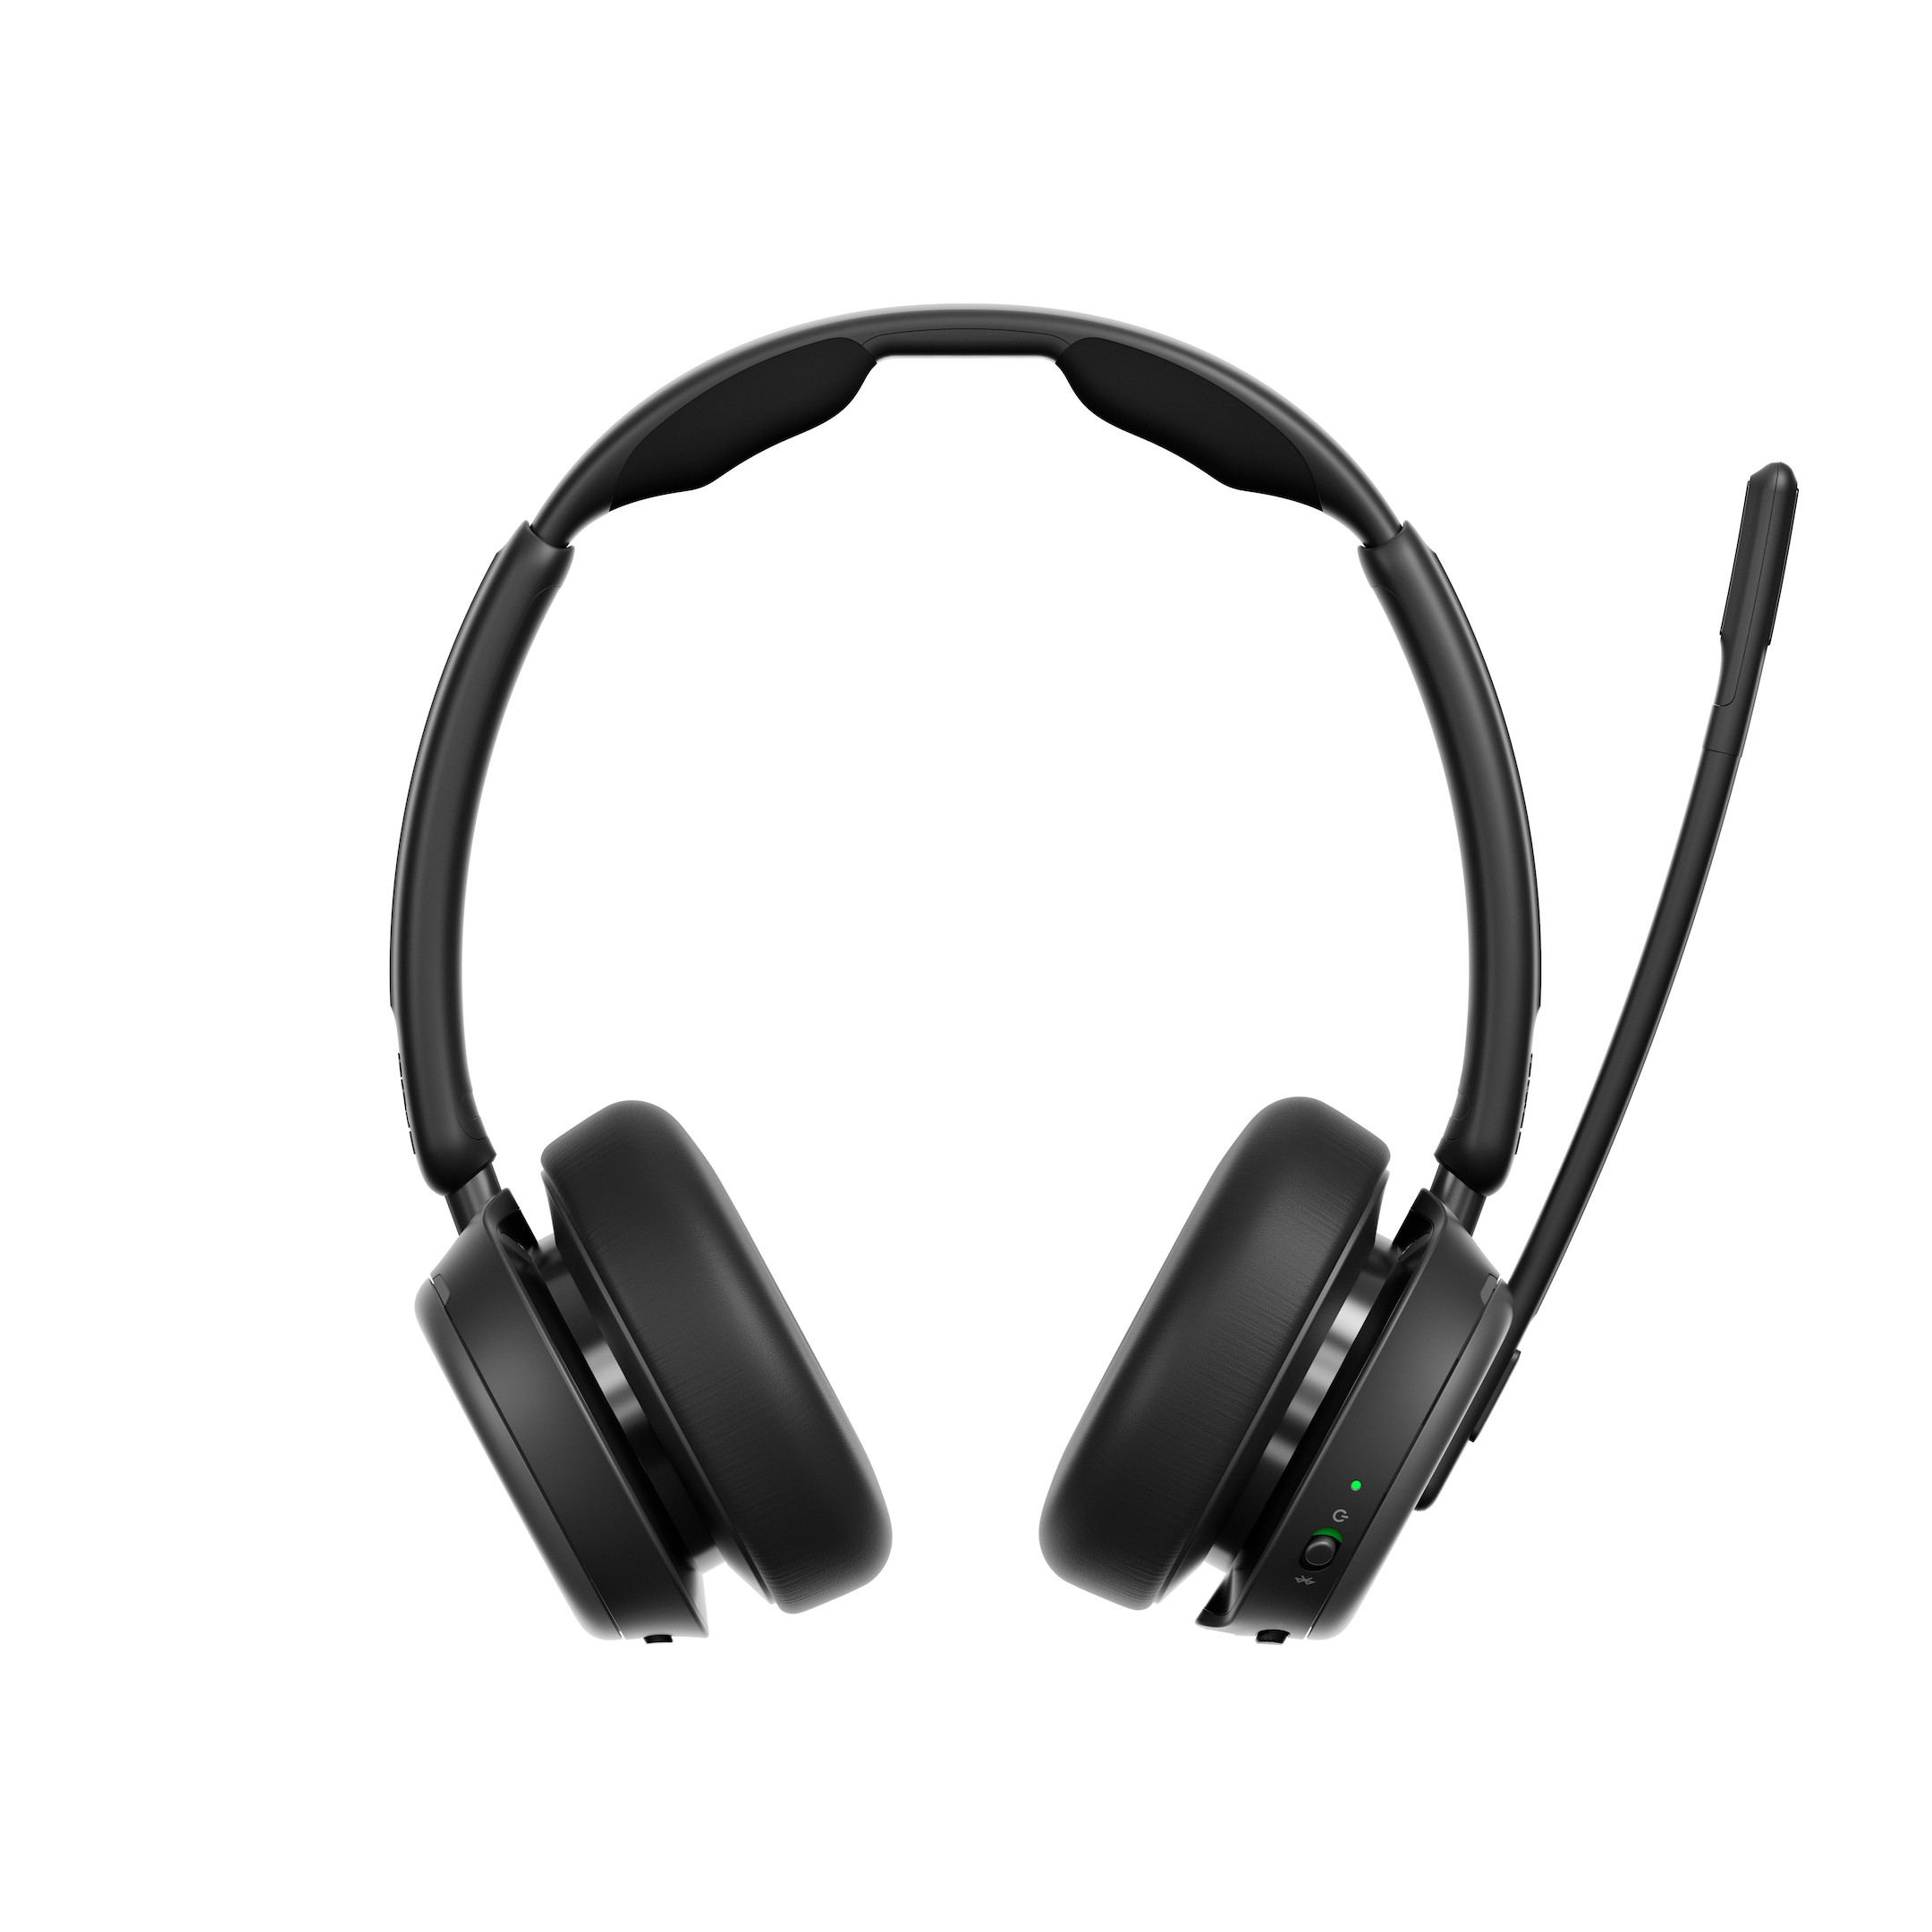 EPOS-IMPACT-1061T-ANC-Stereo-Bluetooth-Headset-Teams-gecertificeerd-met-Active-Noice-Cancelling-ANC-incl-contactloos-oplaadstation